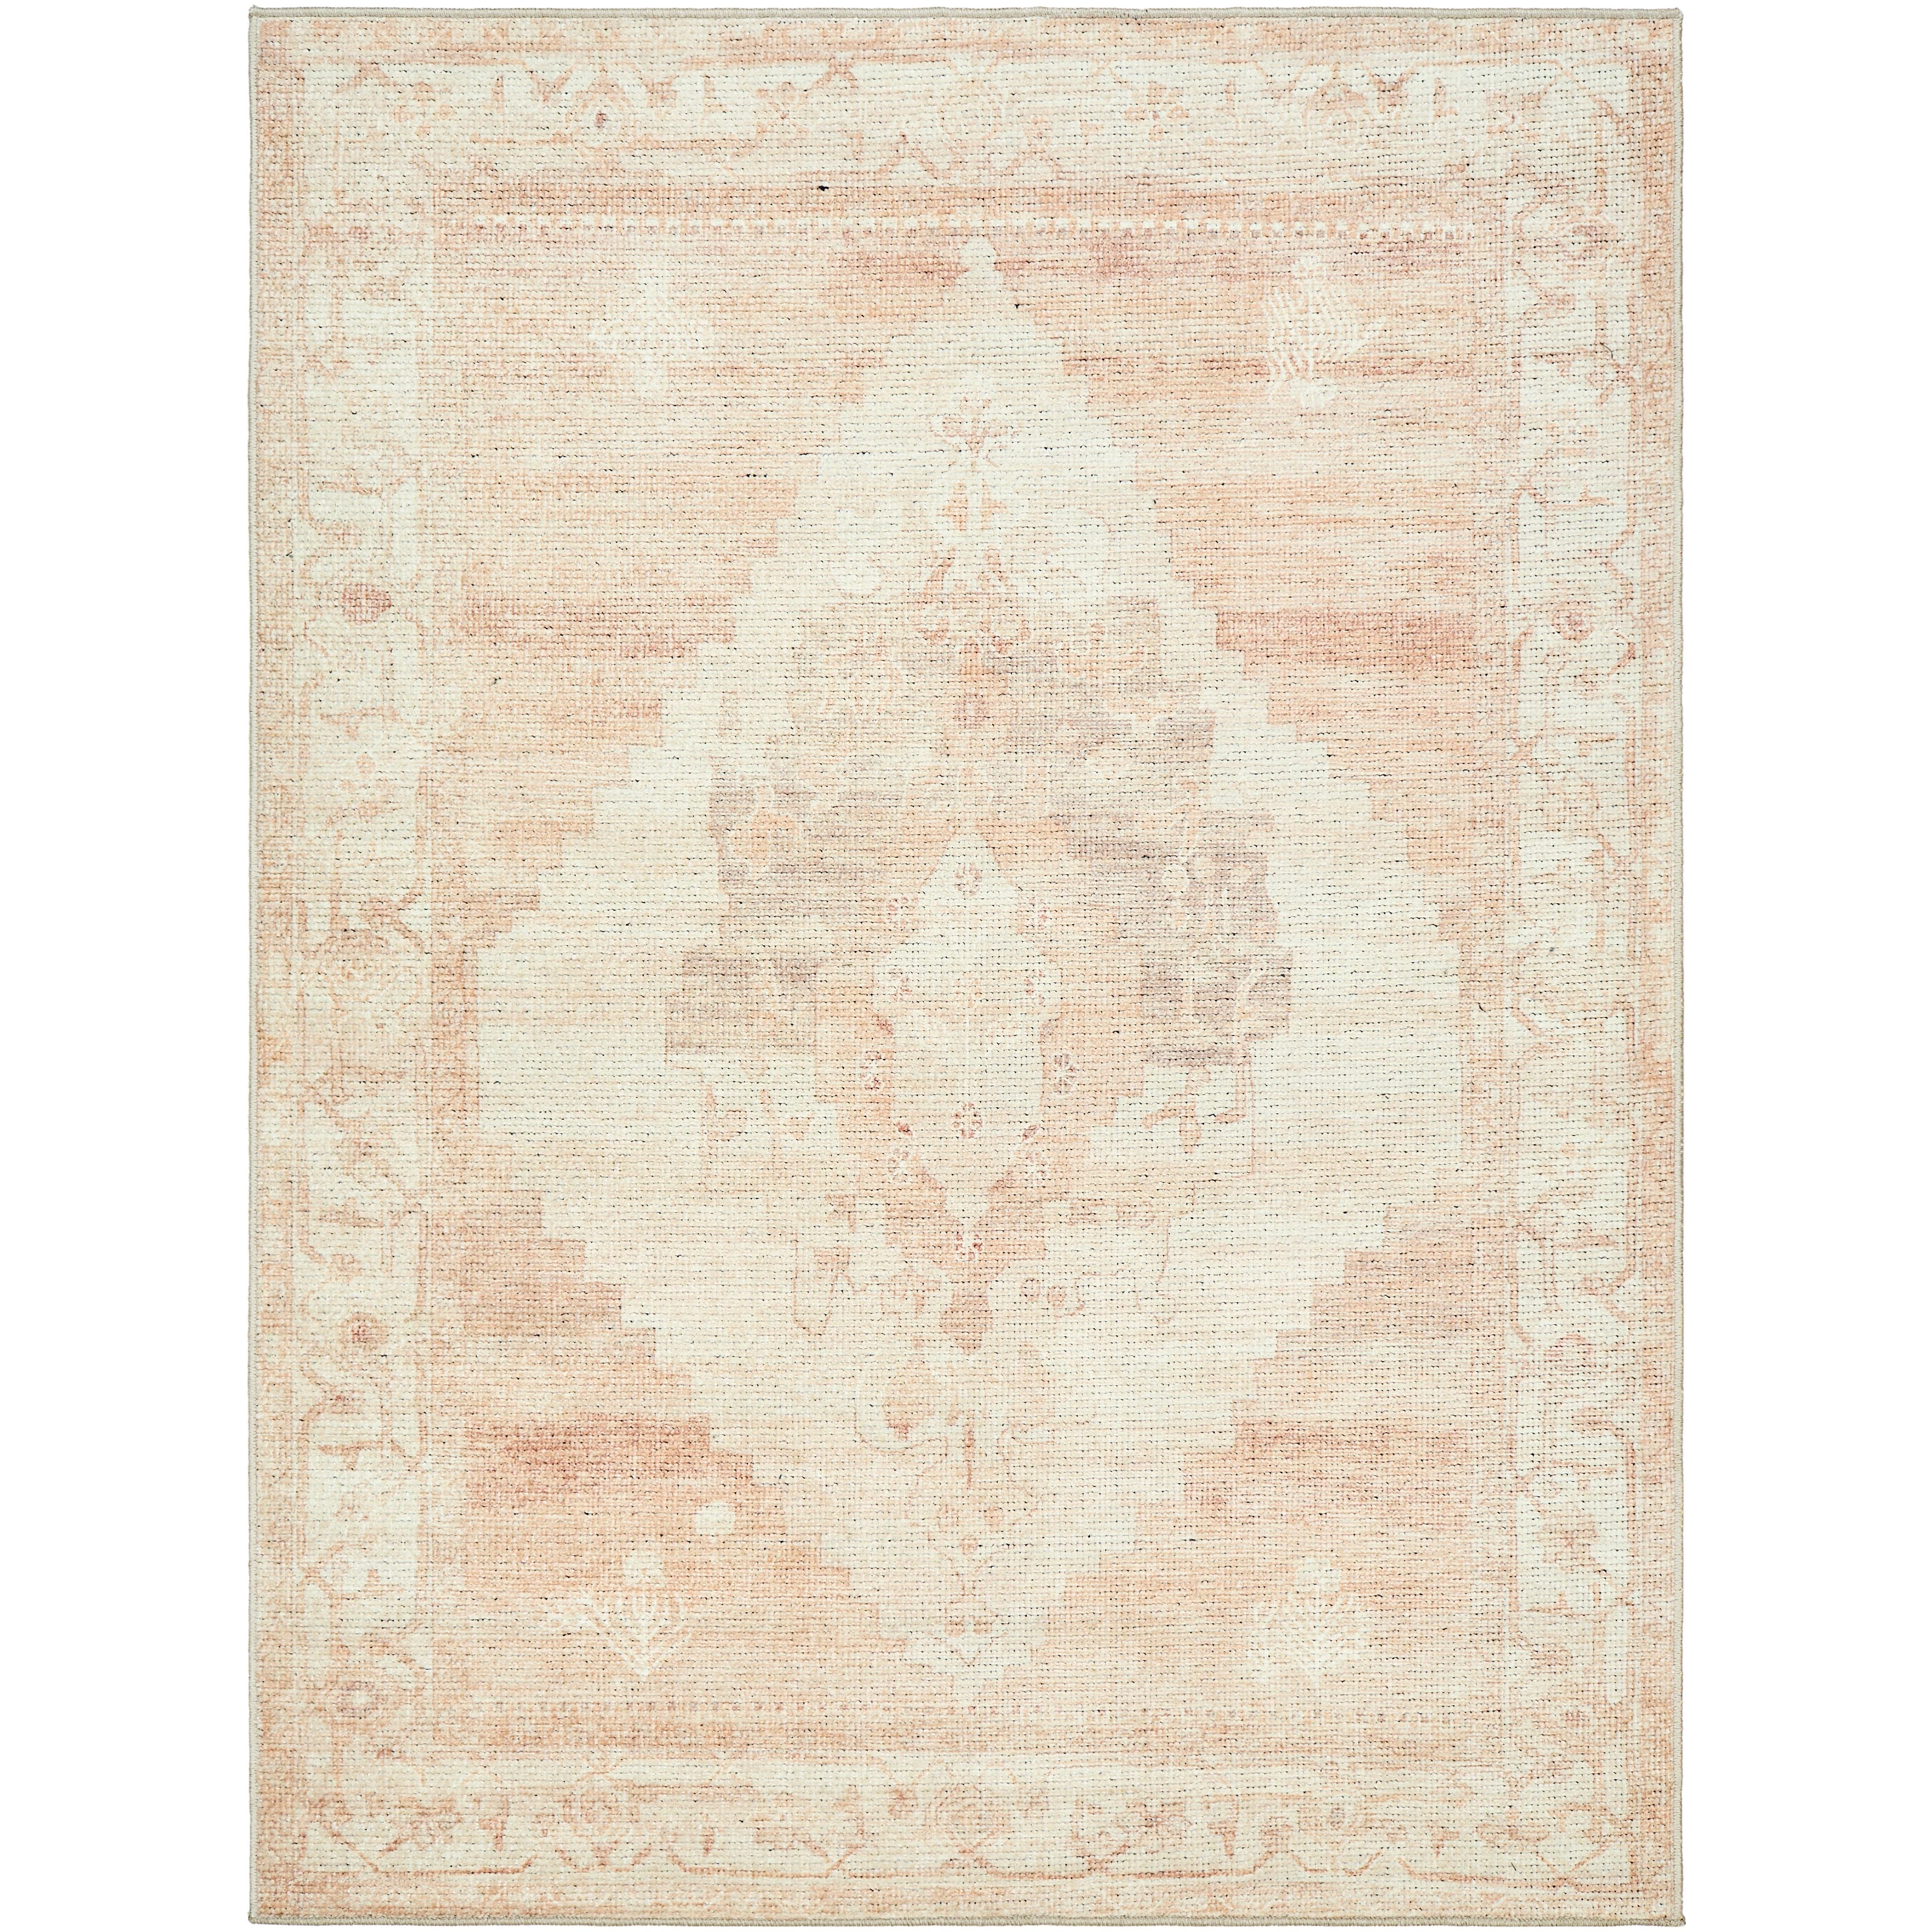 The Luca Dusty Pink Medallion Rug from Becki Owens x Surya is a vintage inspired collection full of rich design and subtle versatile colors that will bring a curated and collected feel to any room. Amethyst Home provides interior design, new construction, custom furniture, and area rugs in the Kansas City metro area.